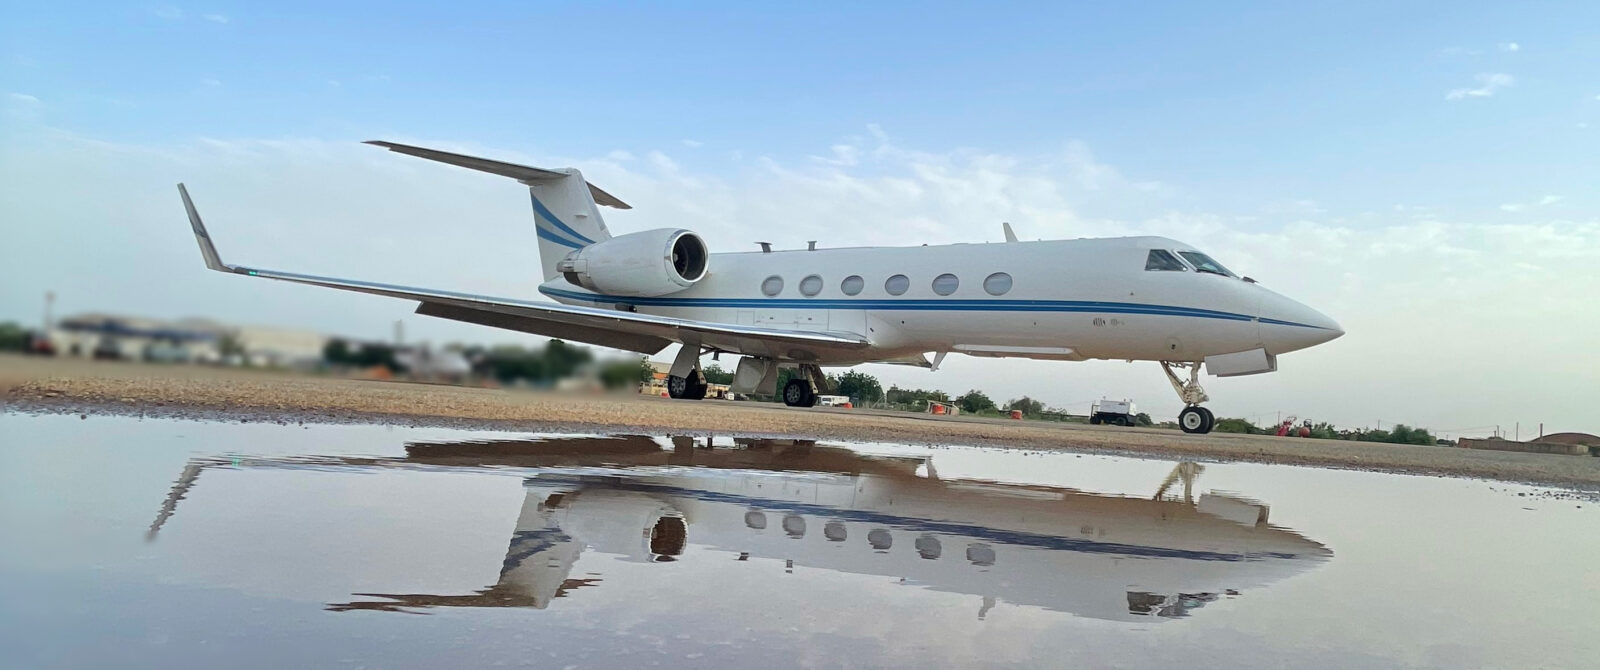 Private jet on a runway, reflected in pooled water